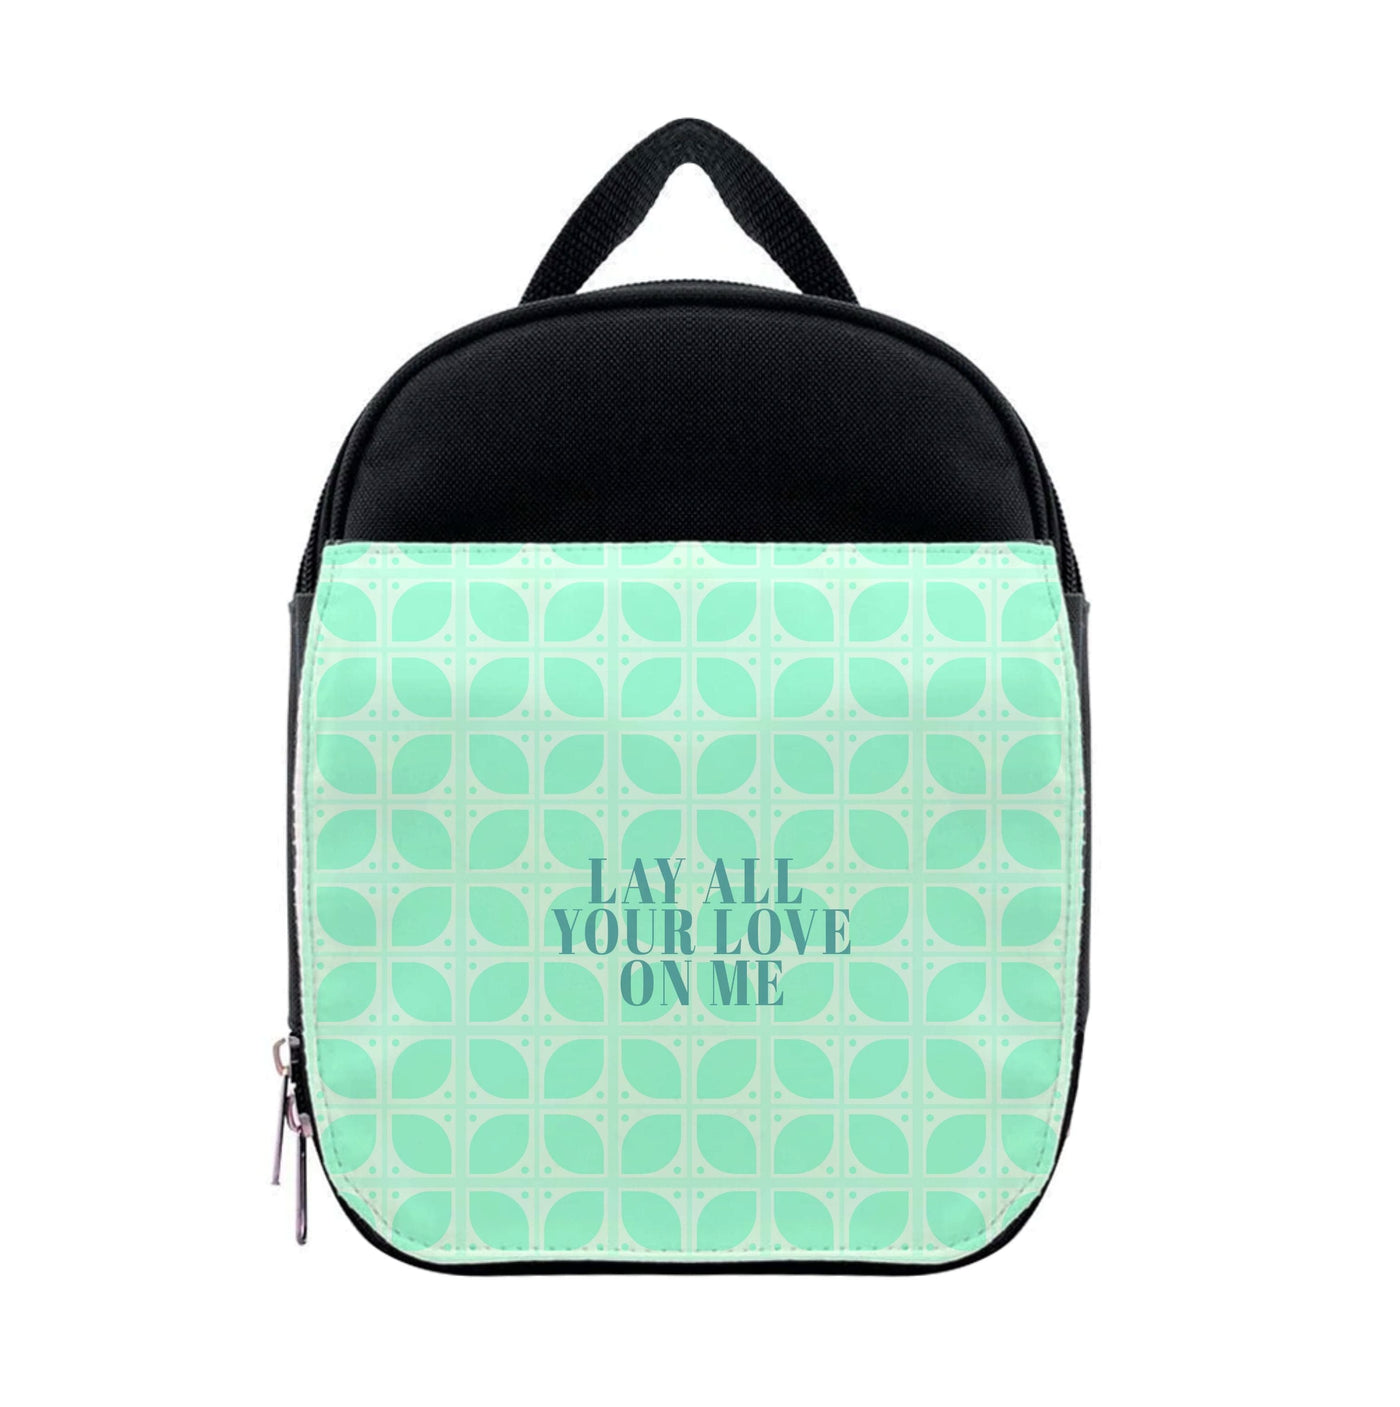 Lay All Your Love On Me - Mamma Mia Lunchbox